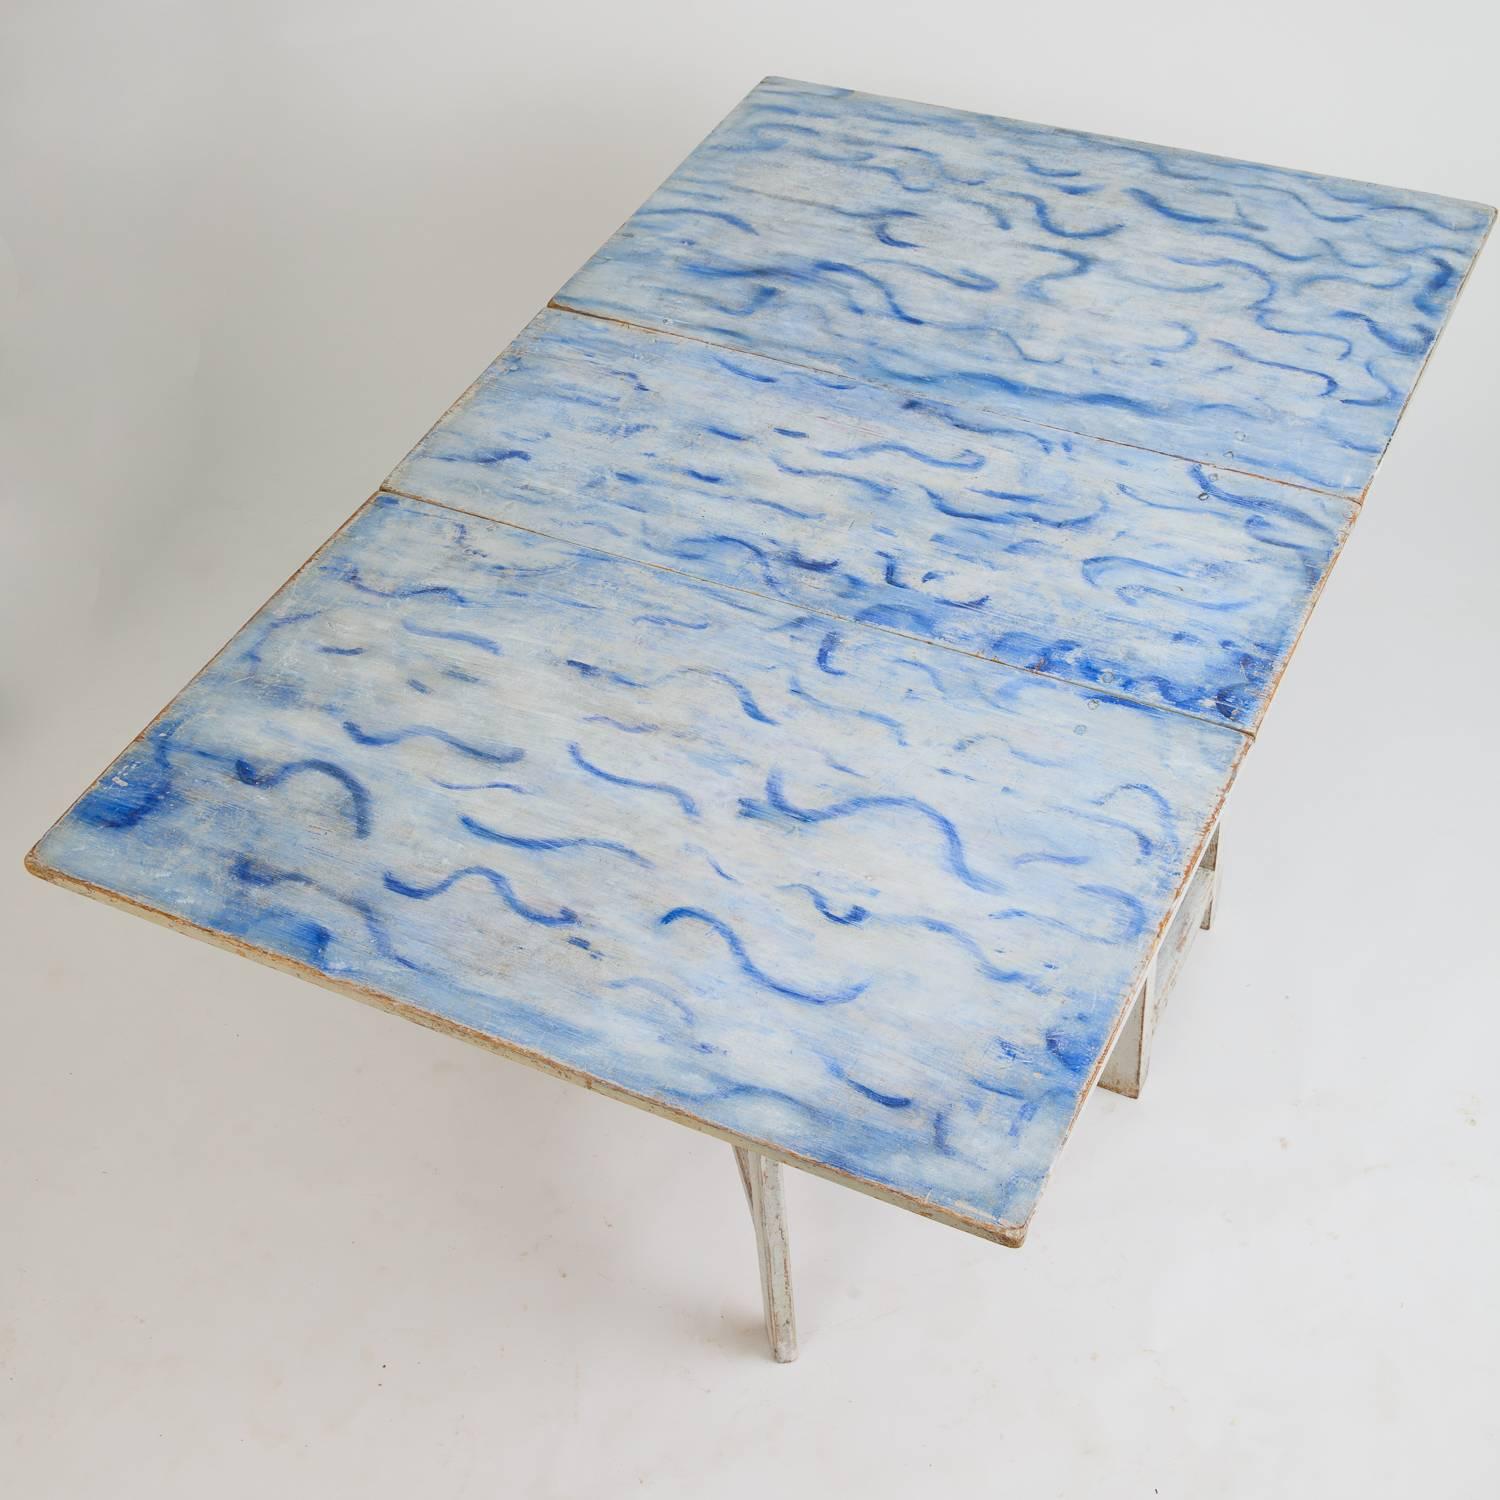 This fantastic Swedish drop-leaf table (slagbord) is a once in a lifetime piece with a beautiful original painted top surface with vibrant waves of blue against a white background. The base retains the original white paint and the leaves drop down